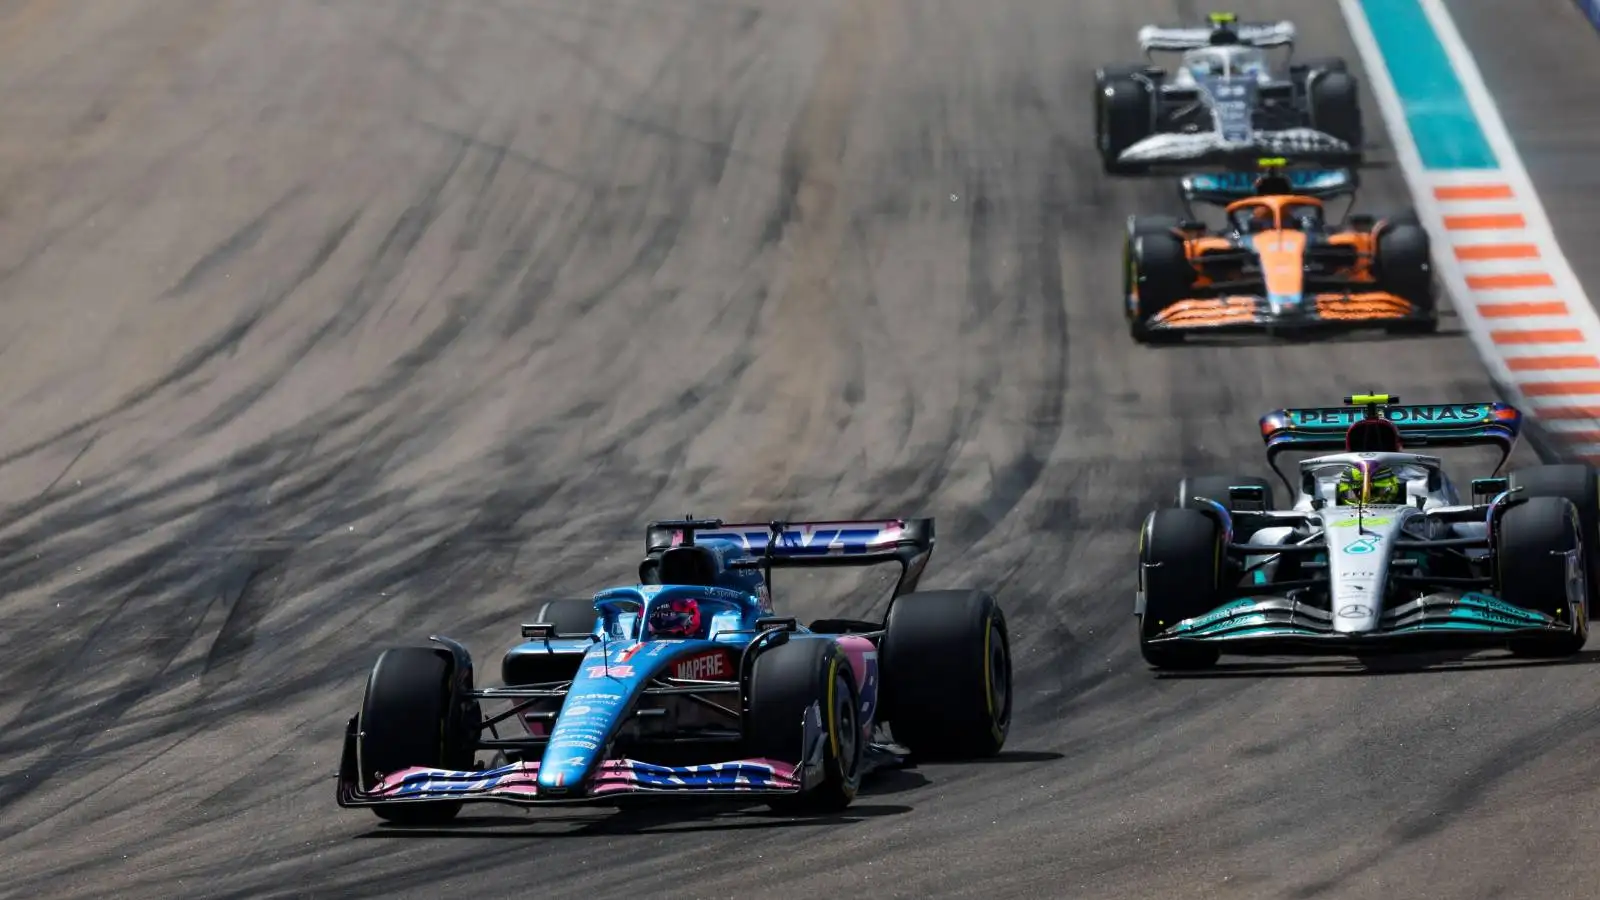 Fernando Alonso ahead of Lewis Hamilton in Miami. United States, May 2022.